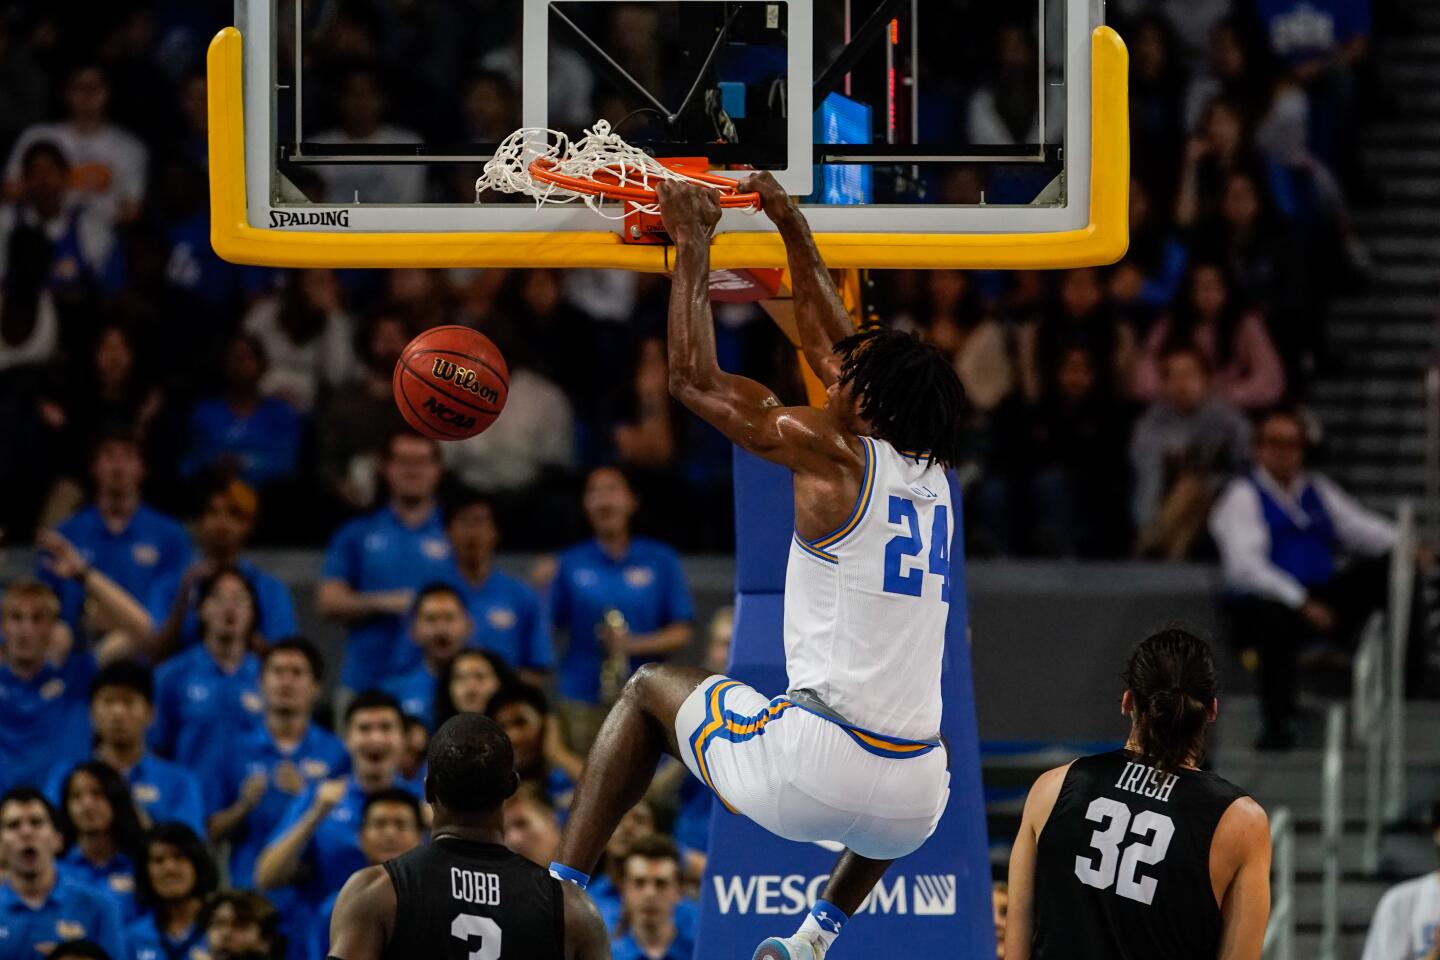 UCLA forward Jalen Hill (24) dunks the ball during the first half of a game against Long Beach State on Nov. 6 at Pauley Pavilion.